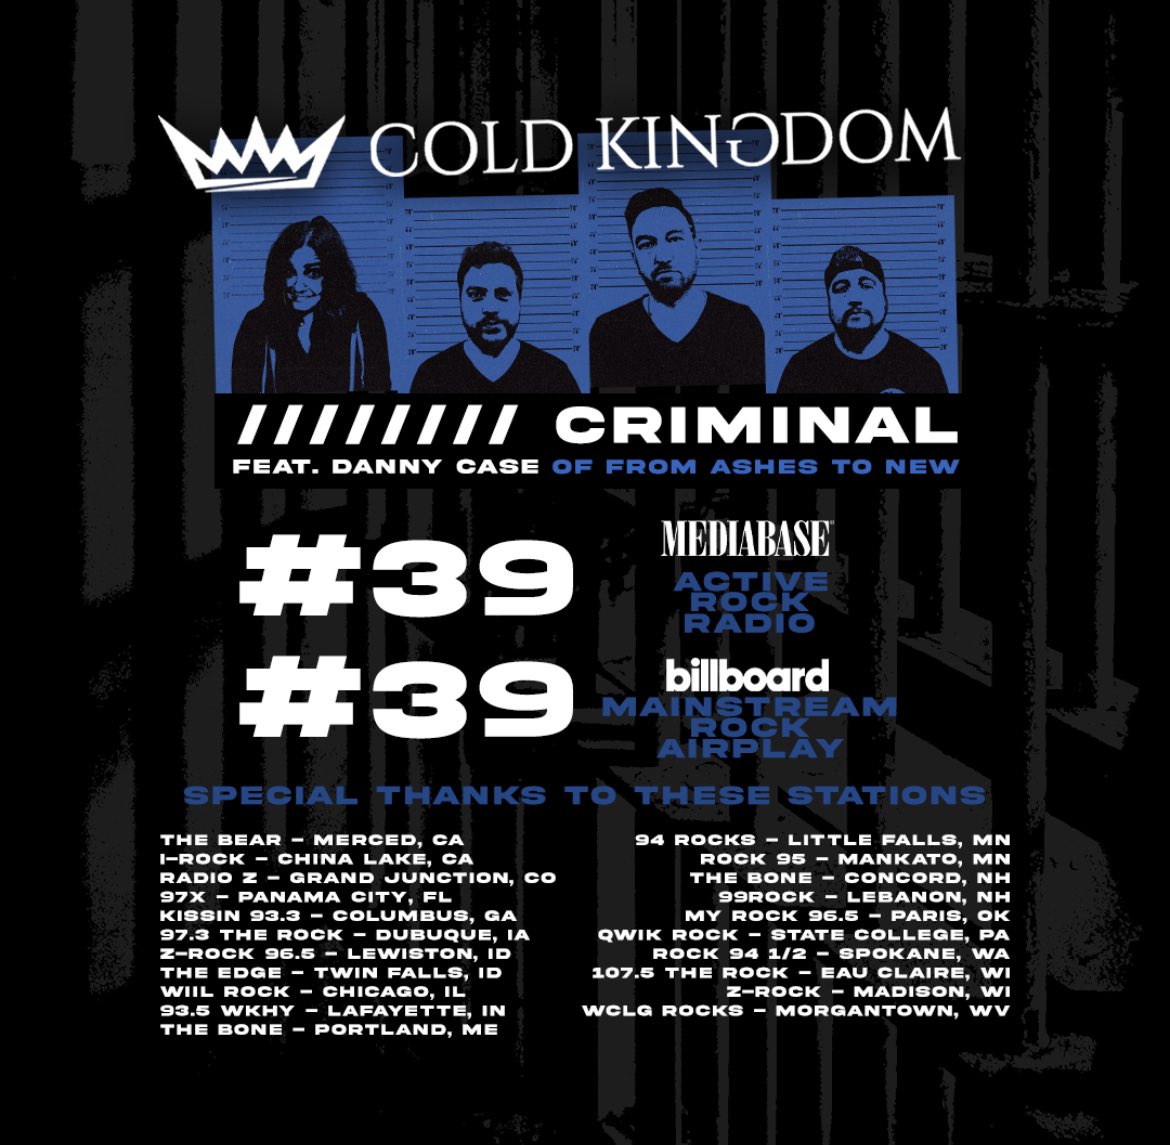 Cold Kingdom on Twitter: "CRIMINAL has broke the top 40 in both @MediabaseCharts active rock AND @billboard mainstream rock charts! Thank you everyone for support and keep demanding your favorite station